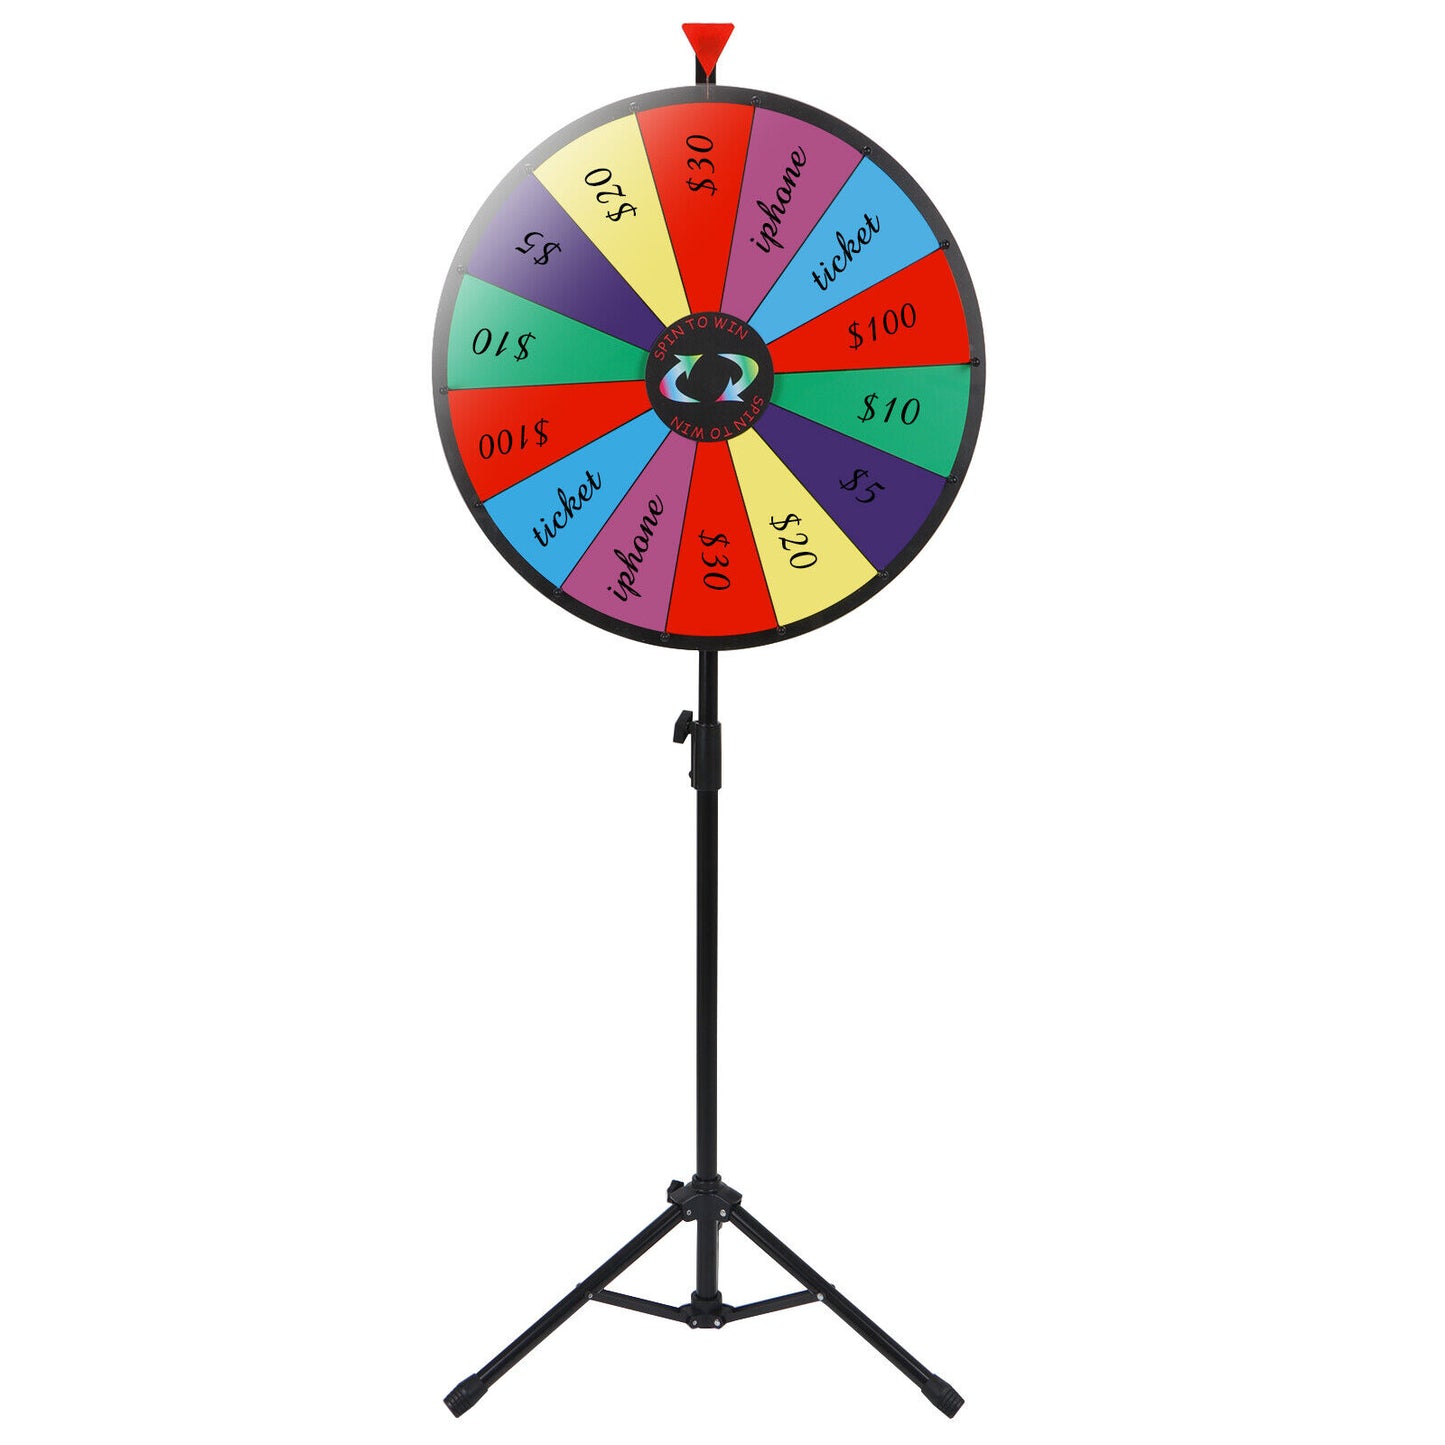 24" Color Prize Wheel Fortune w Folding Tripod Floor Stand Carnival Spinnig Game